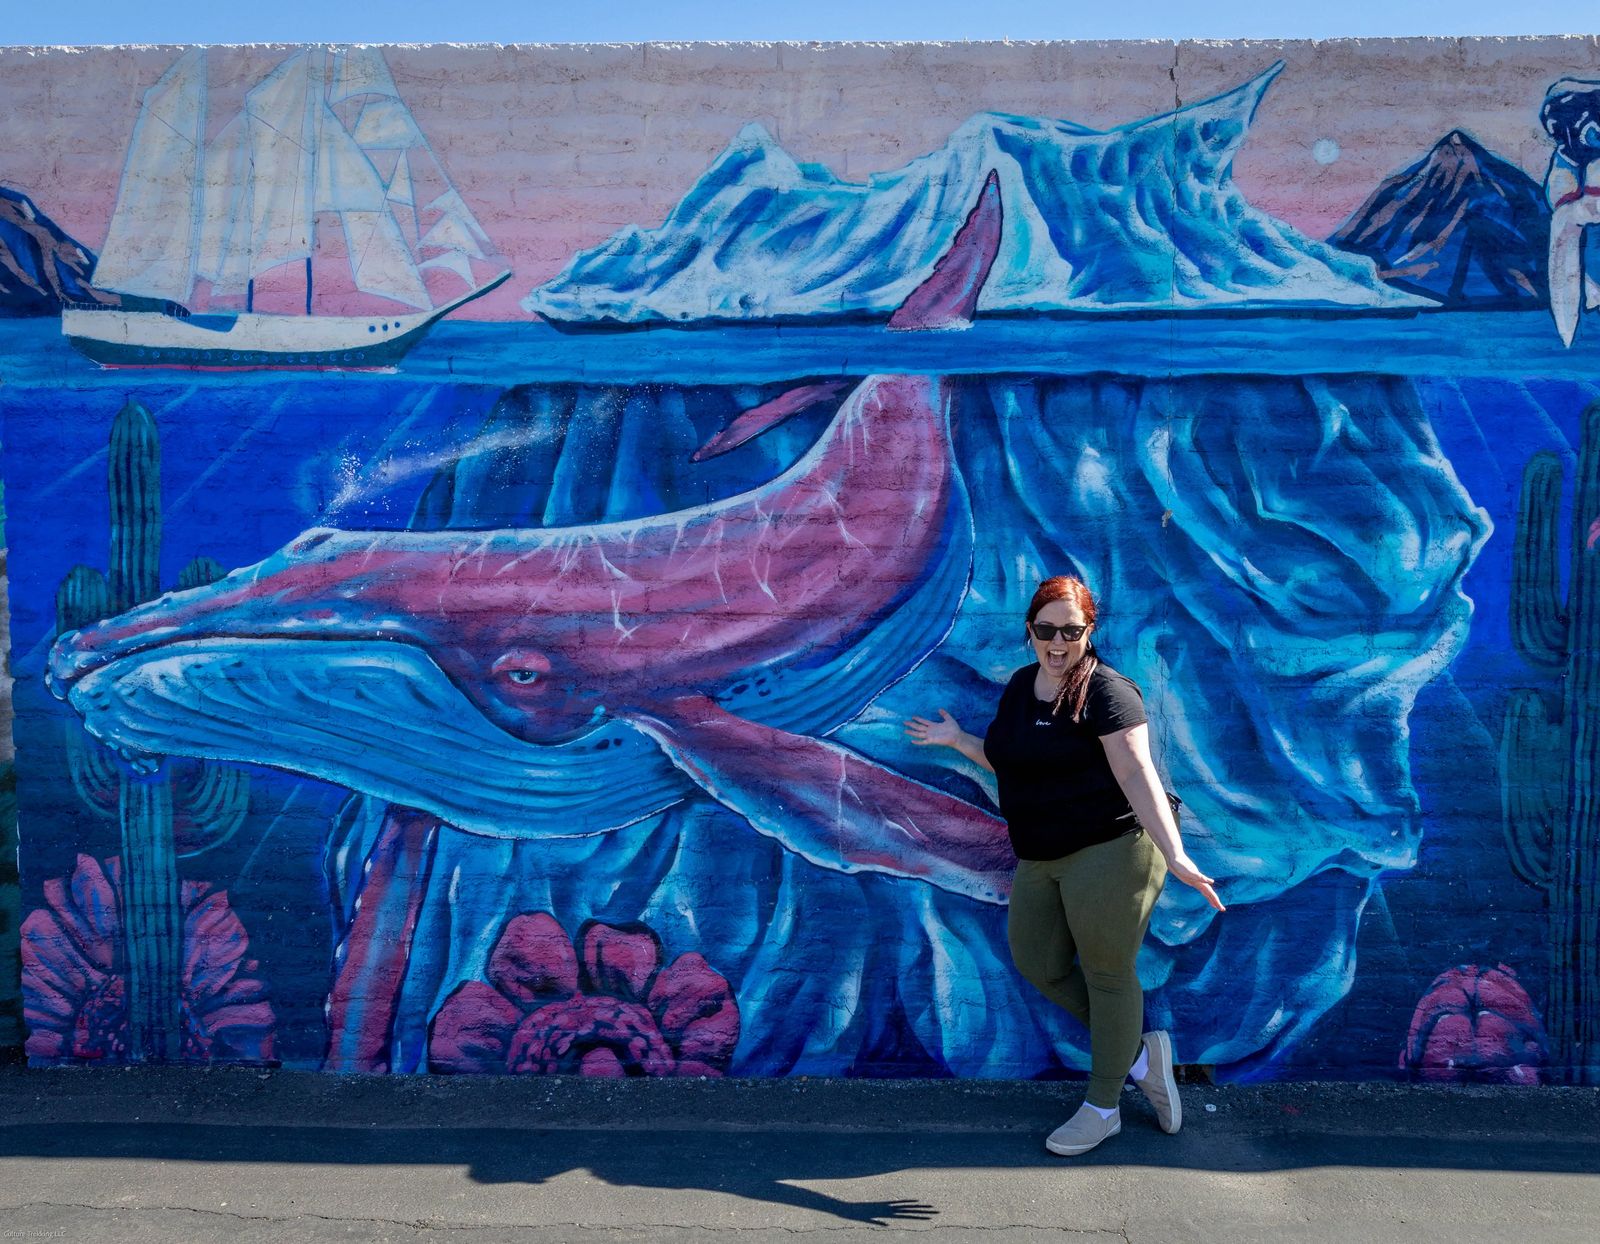 Mural of Whale in Pheonix - Downtown Phoenix in 48 Hours